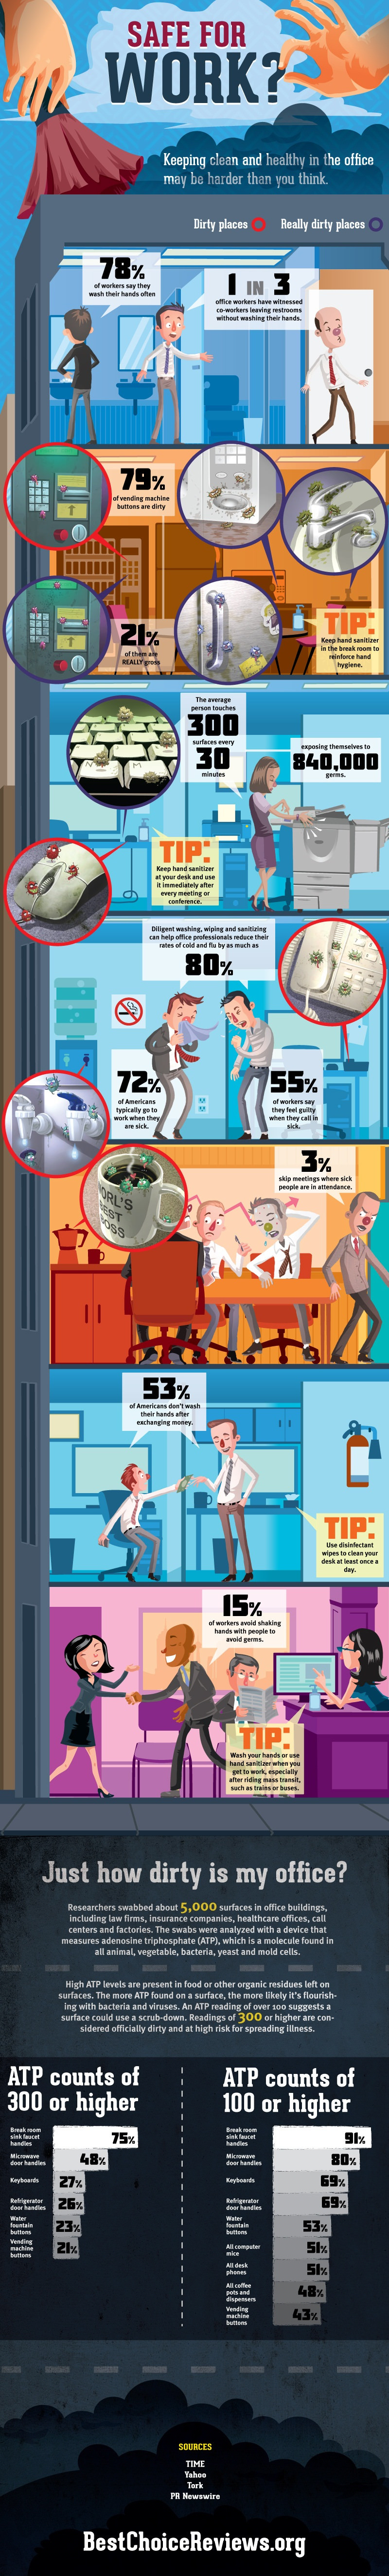 Informative: Are You Safe at Work?